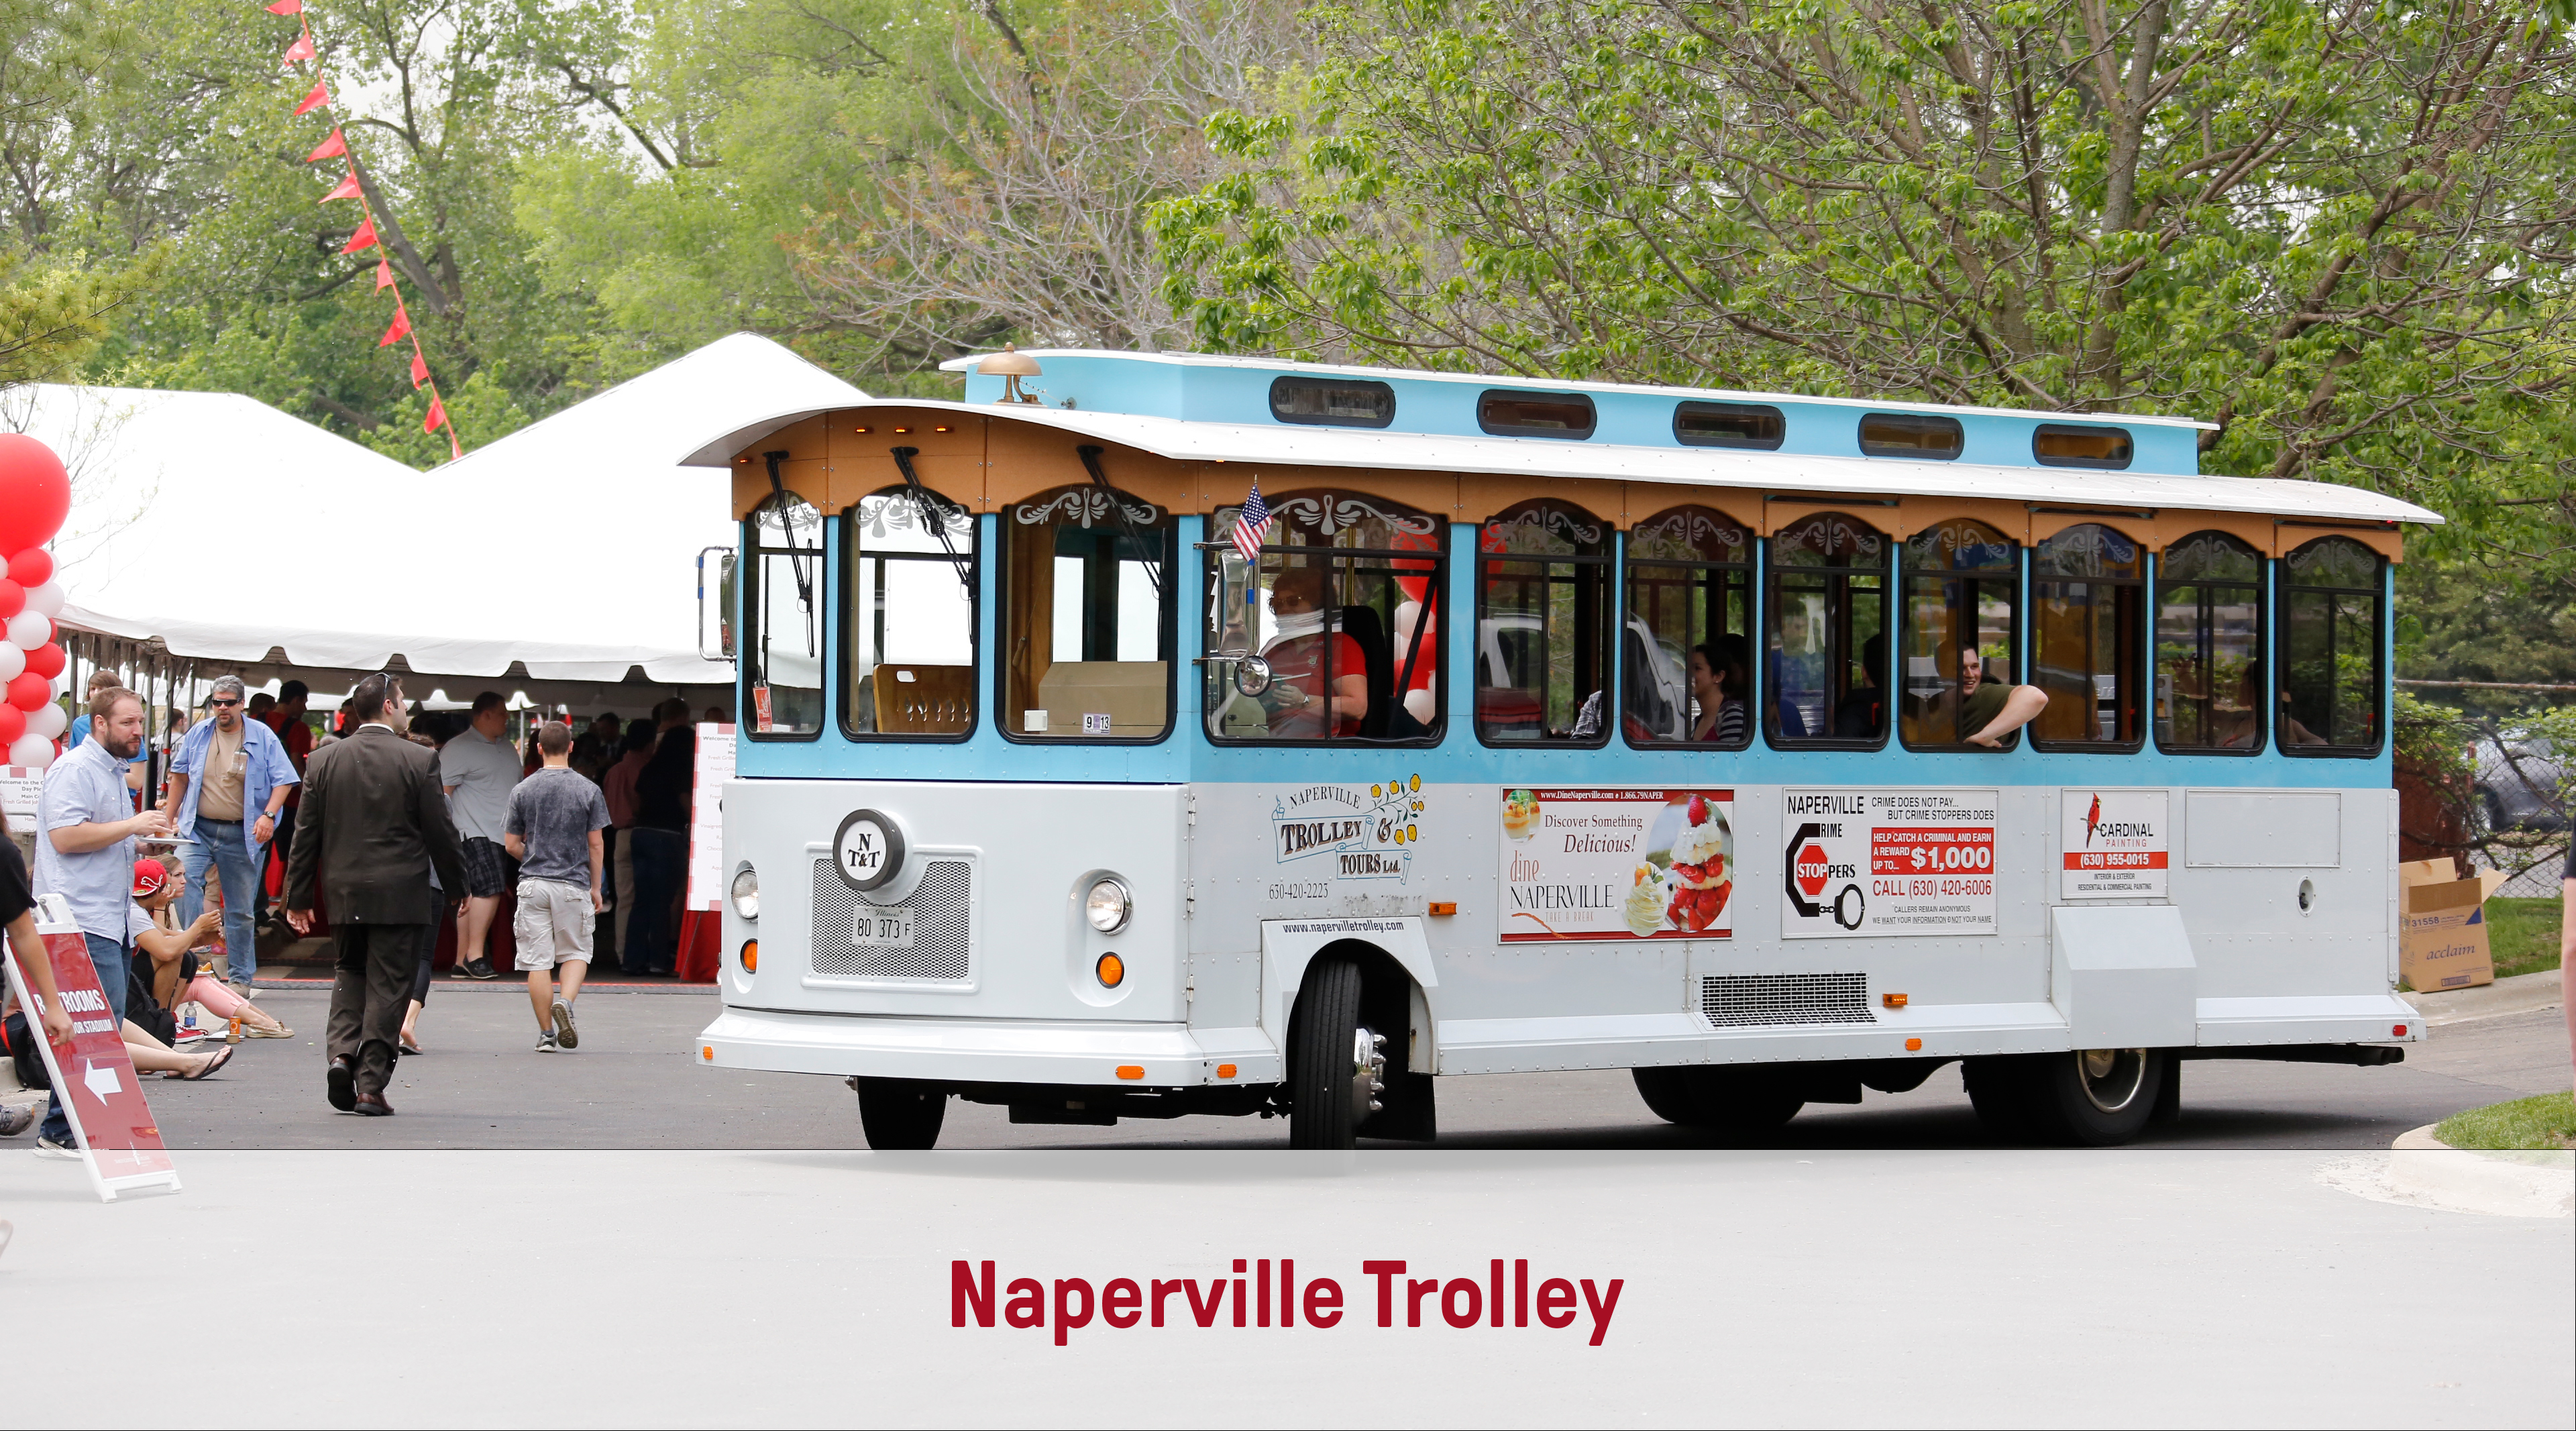 Naperville Trolley